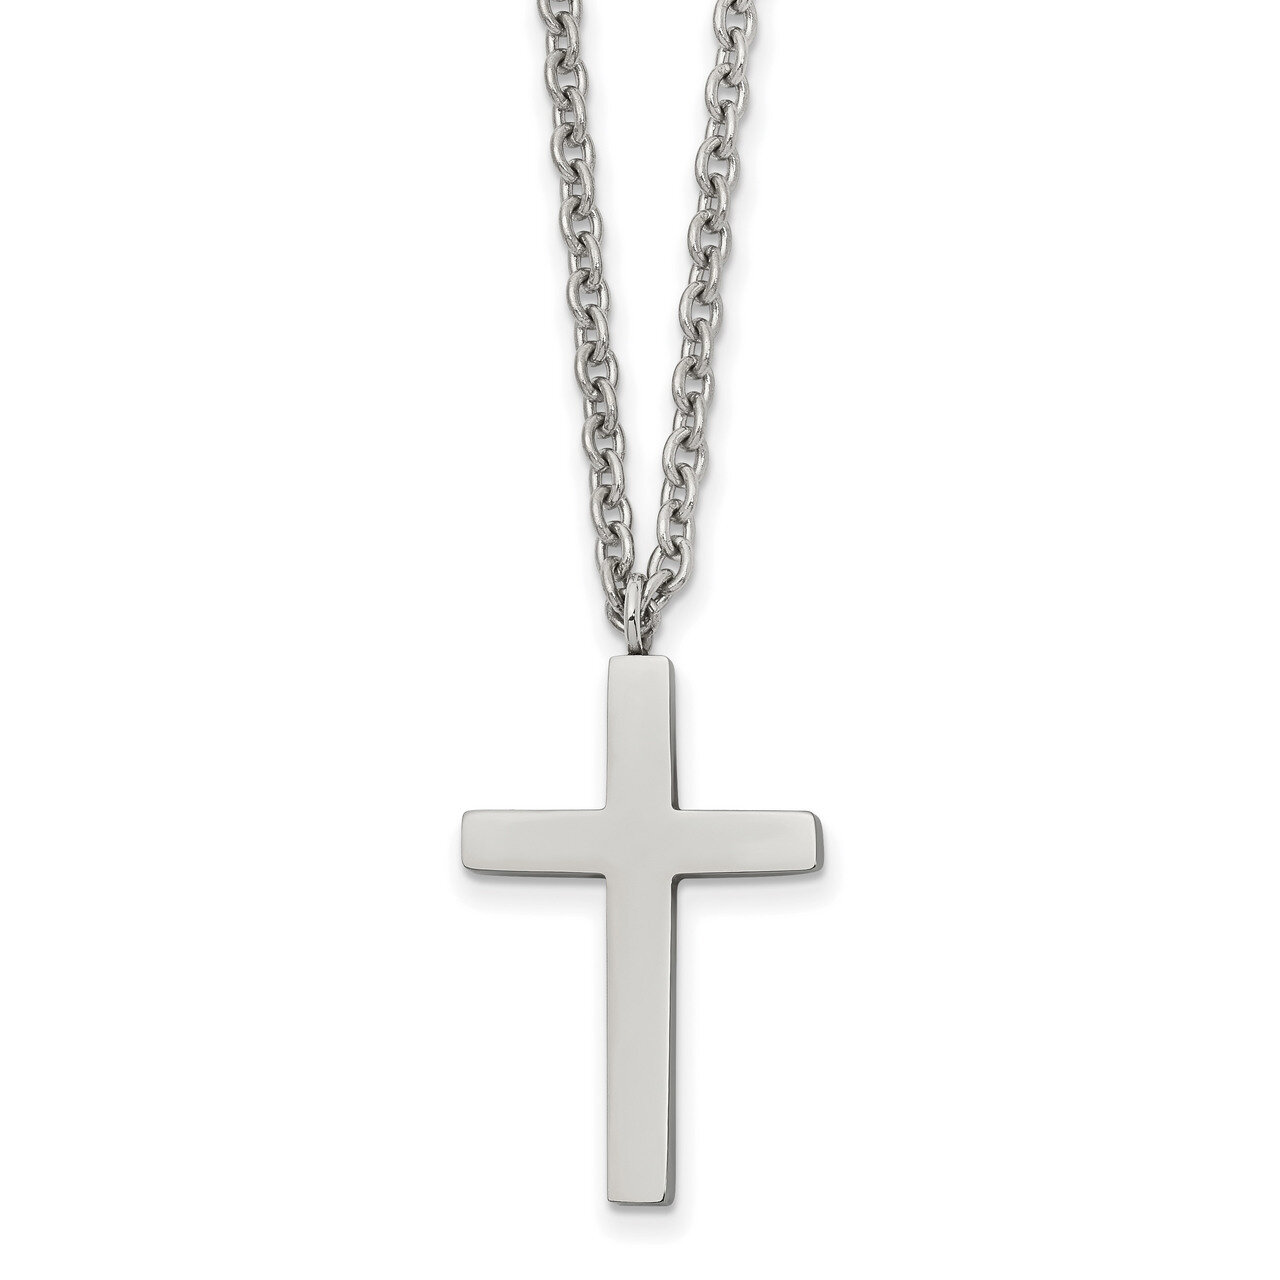 25mm Cross 18 inch Necklace Stainless Steel Polished SRN2503-18